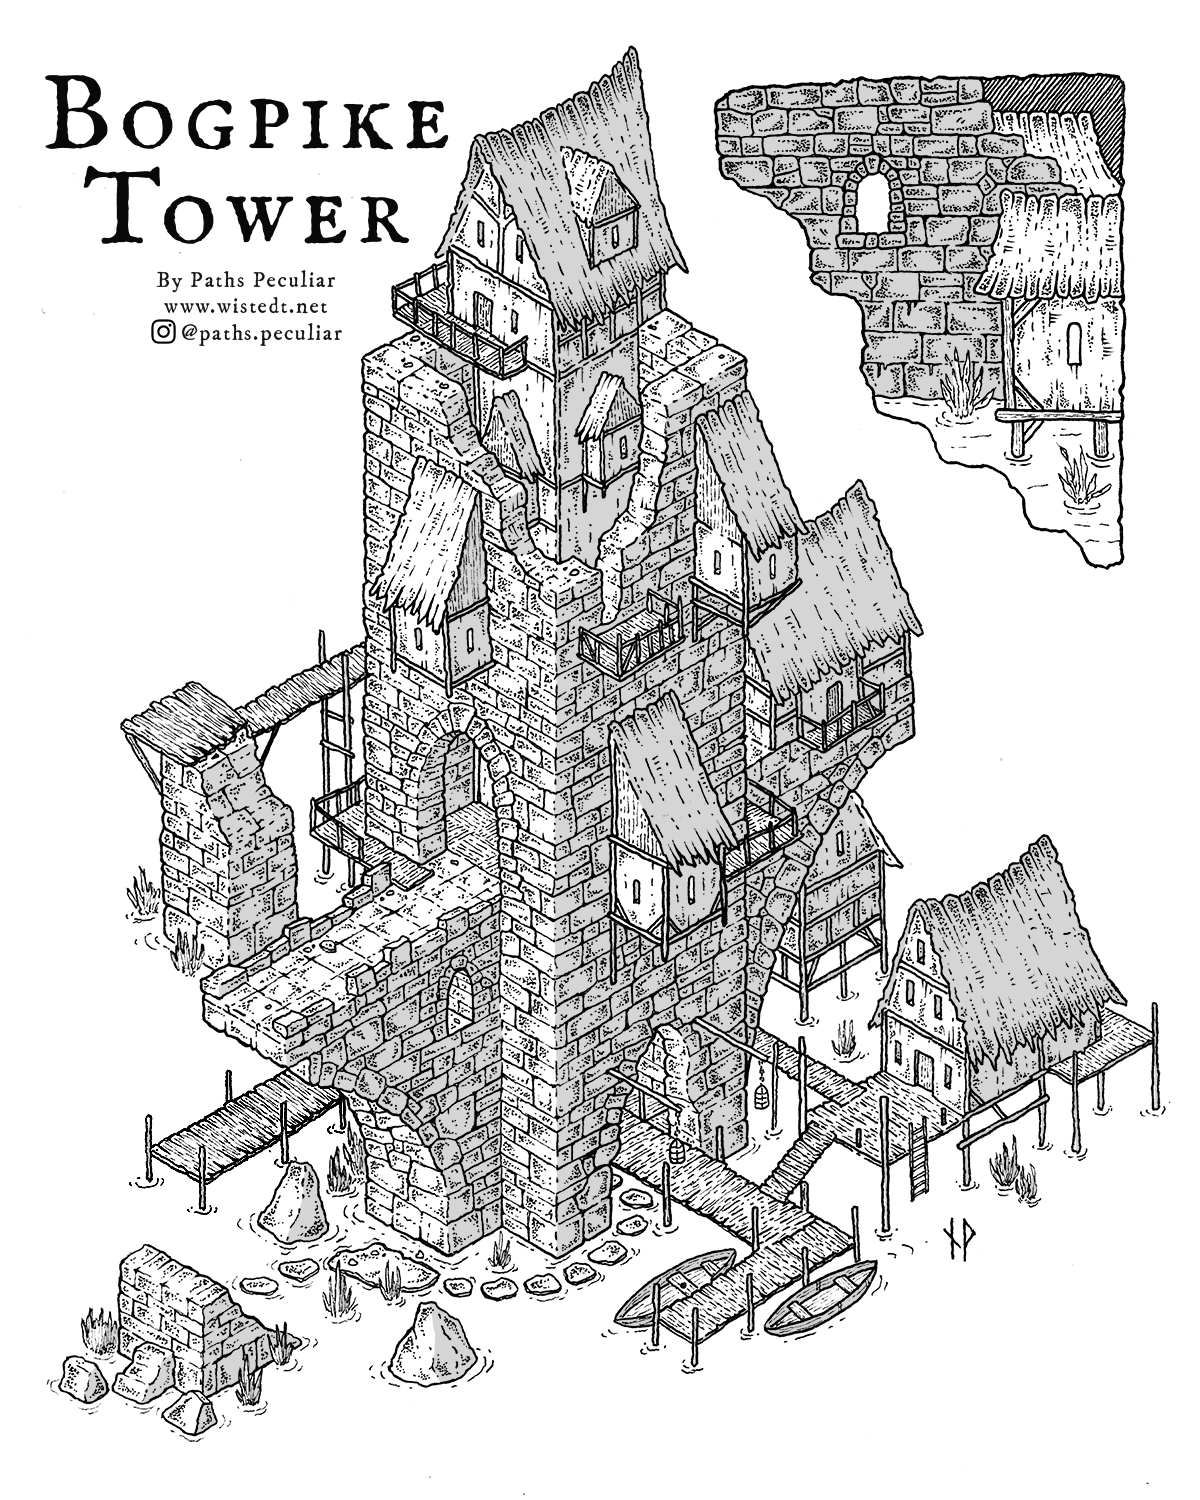 Isometric drawing of a tower in the swamp, with added buildings and huts.